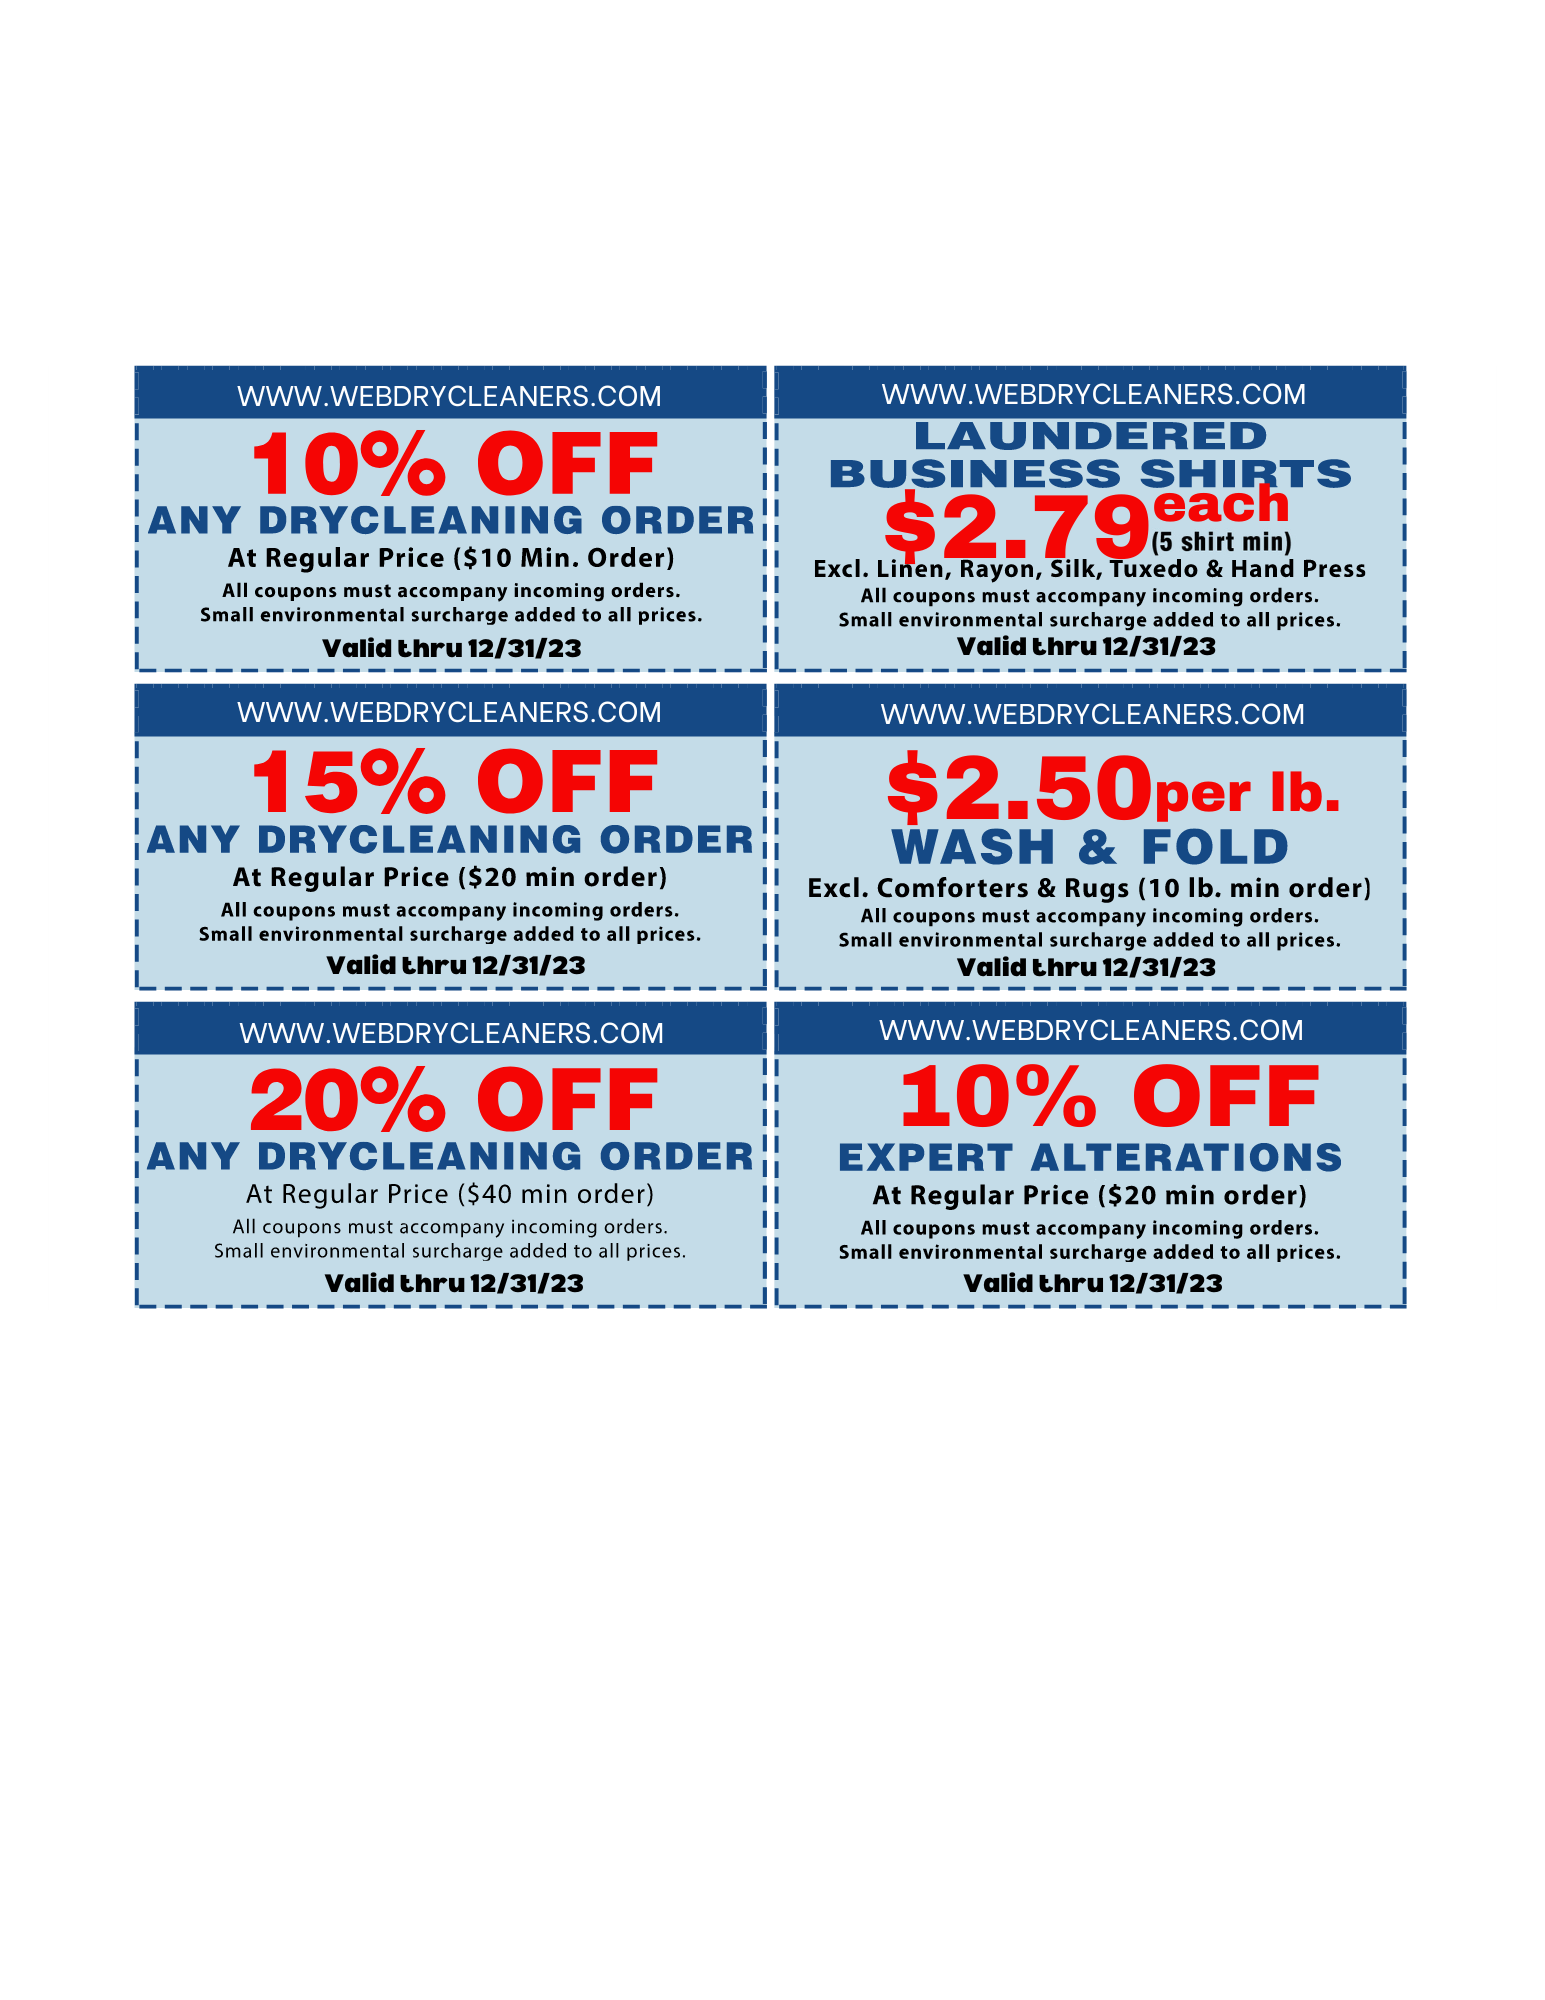 Web Dry Cleaners Web Coupons December